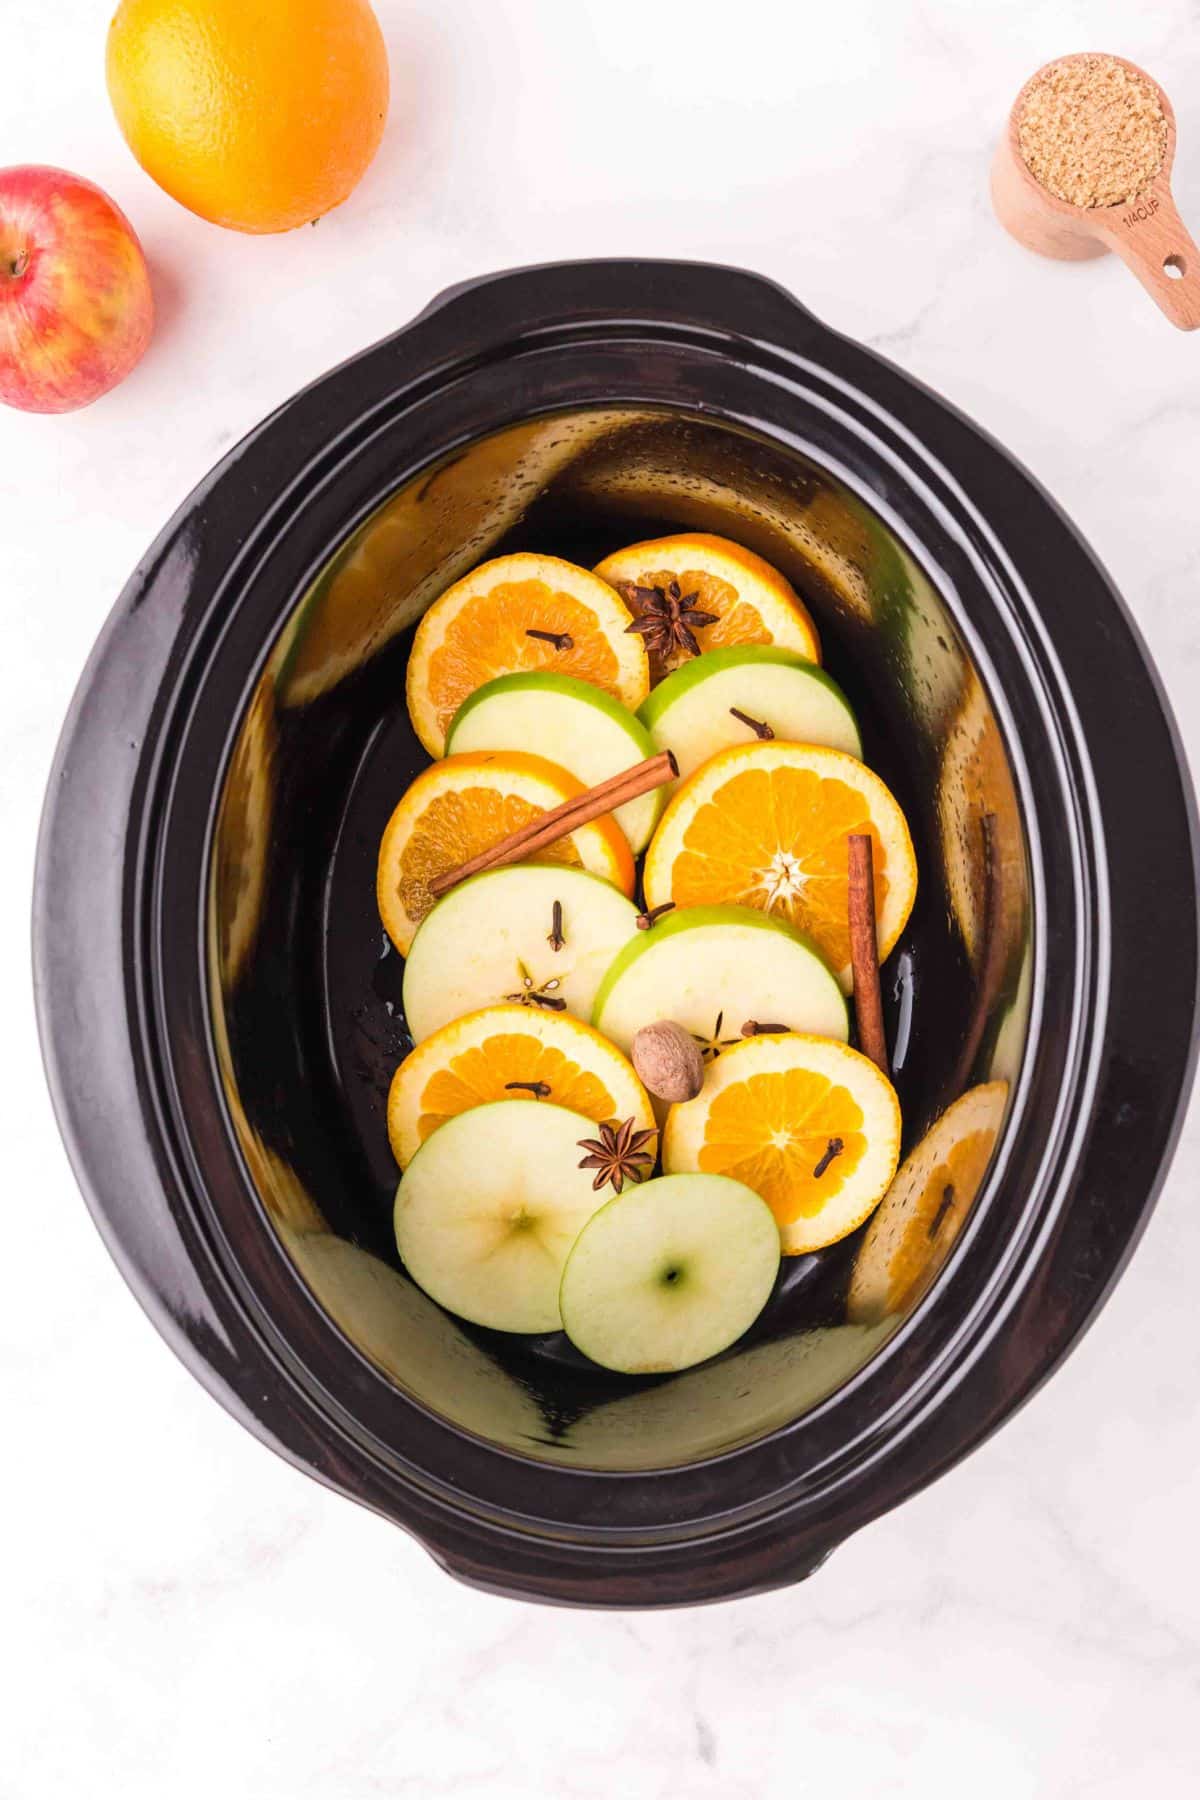 apple and orange slices with spices in crockpot